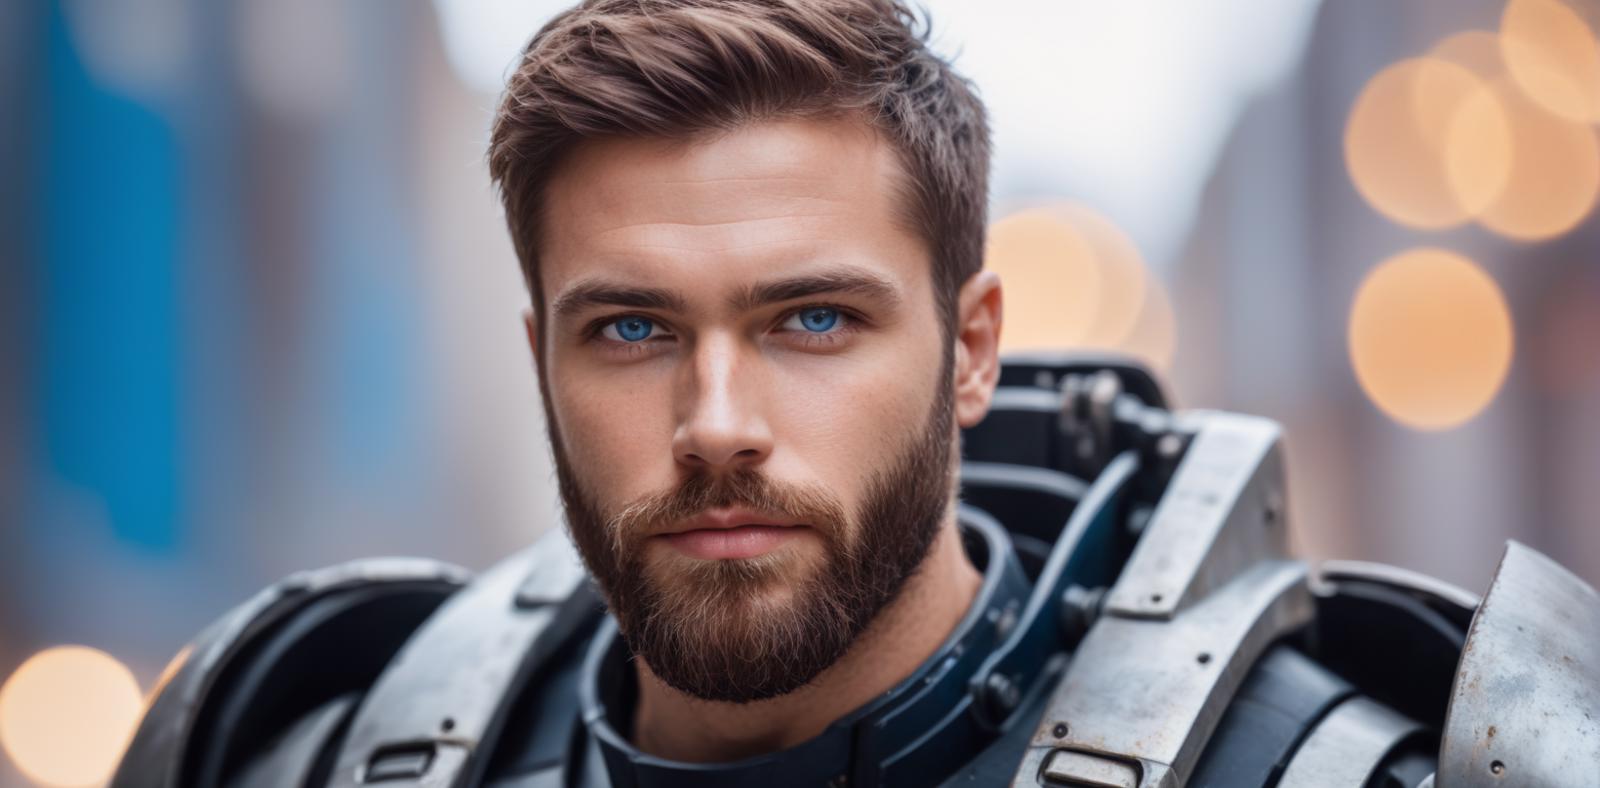 A man with blue eyes, a beard, and a black vest.